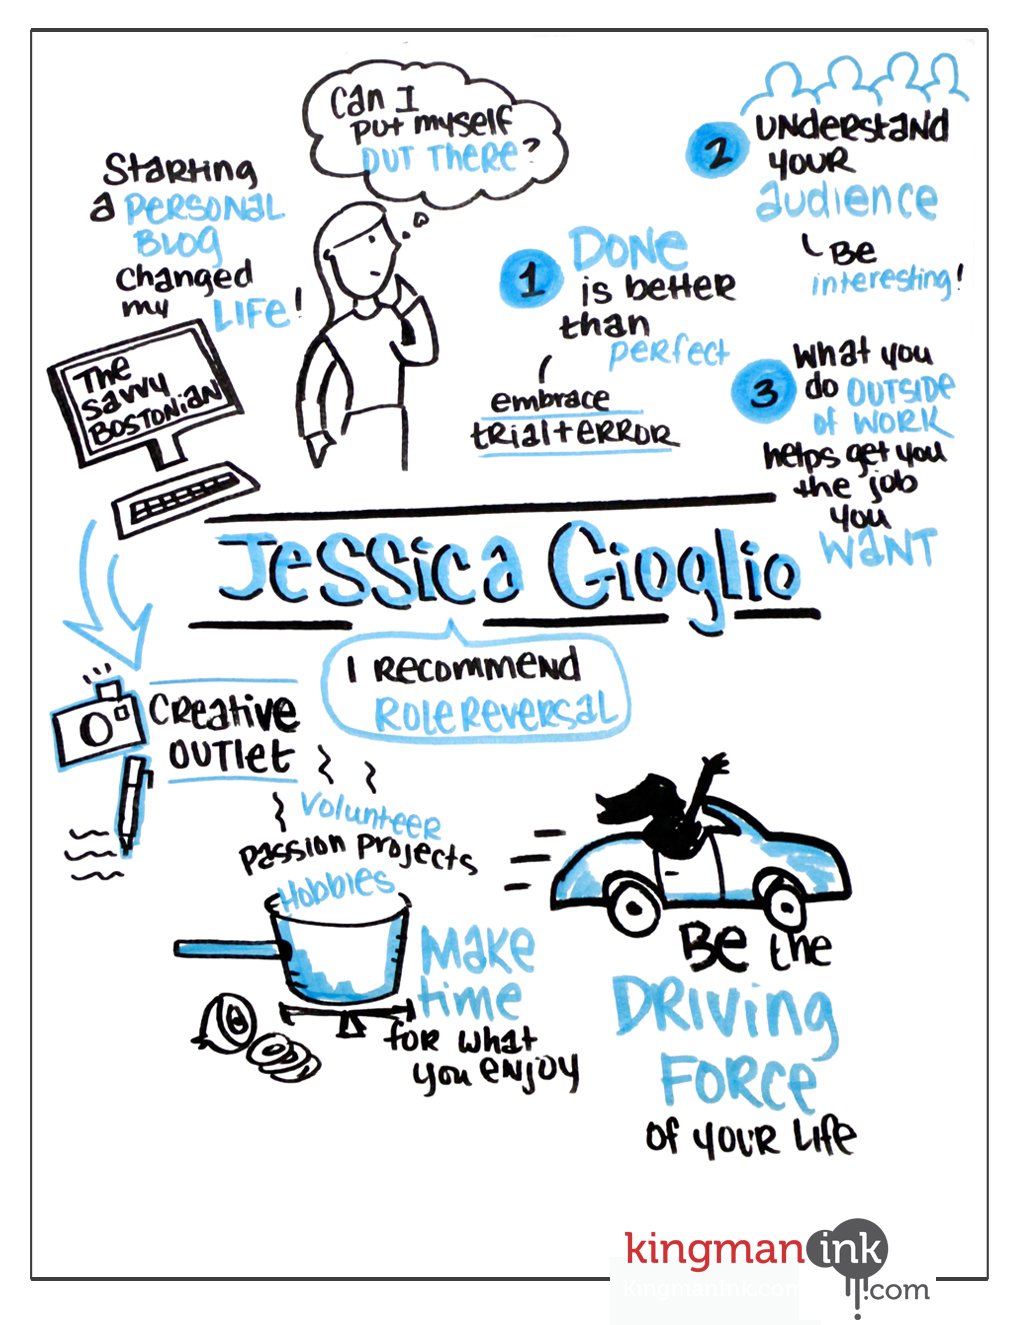 A Bostonian, A Blog & An Unexpected Discovery - Jessica Gioglio [INBOUND Bold Talk]